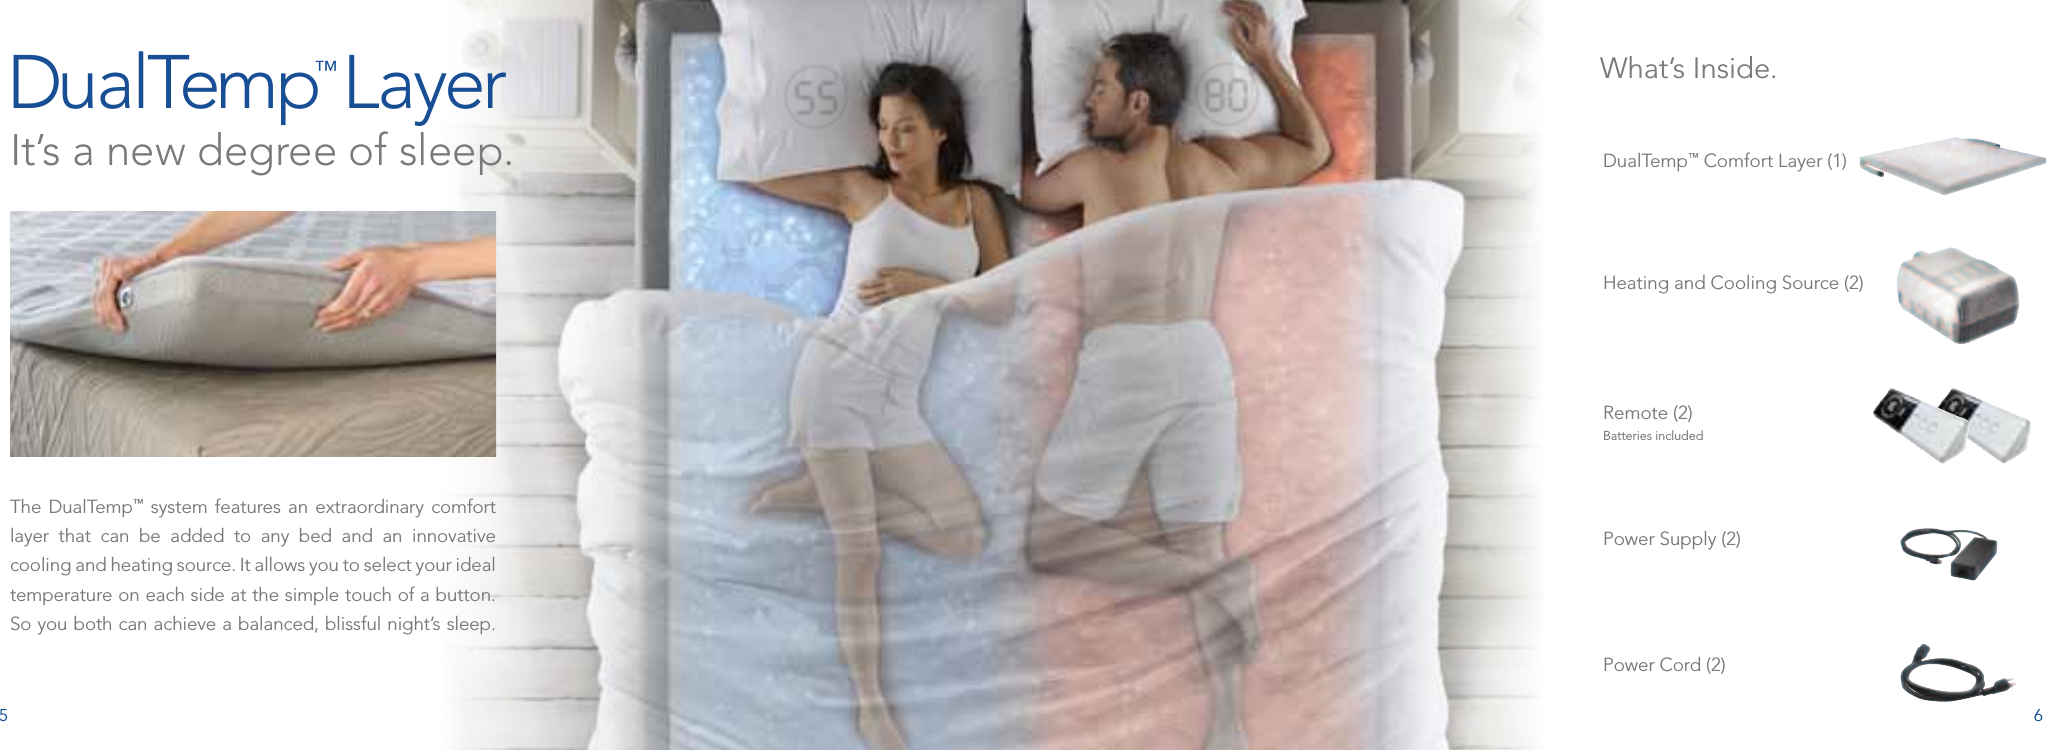 5 6The DualTemp™ system features an extraordinary comfort layer that can be added to any bed and an innovative cooling and heating source. It allows you to select your ideal temperature on each side at the simple touch of a button. So you both can achieve a balanced, blissful night’s sleep. DualTemp™ Comfort Layer (1)Heating and Cooling Source (2)Remote (2) Batteries includedPower Supply (2)Power Cord (2) DualTemp™ Layer It’s a new degree of sleep.What’s Inside.